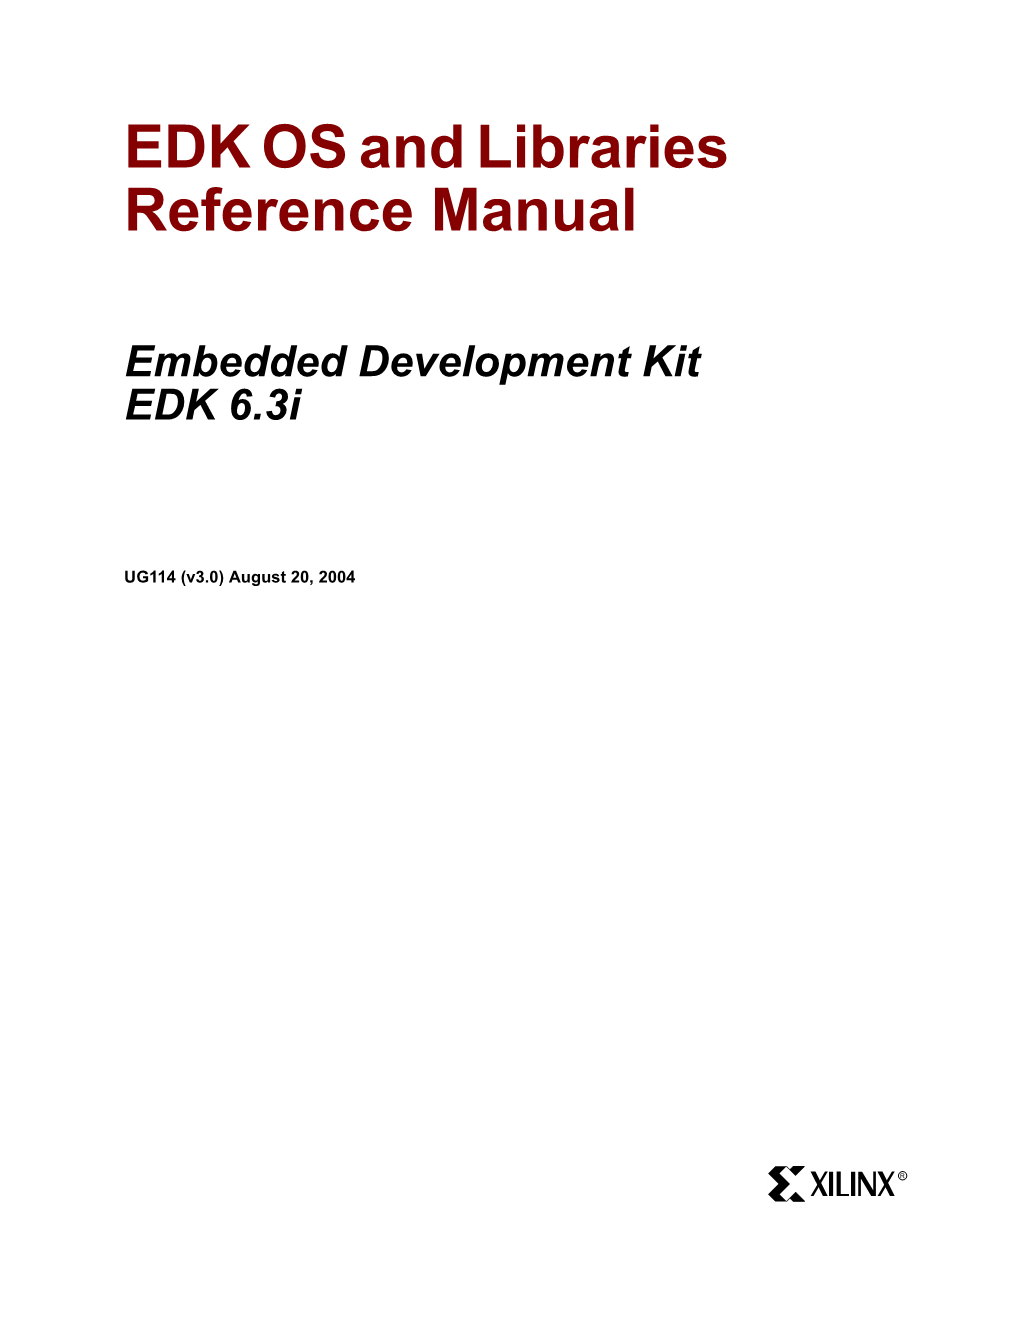 EDK OS and Libraries Reference Manual